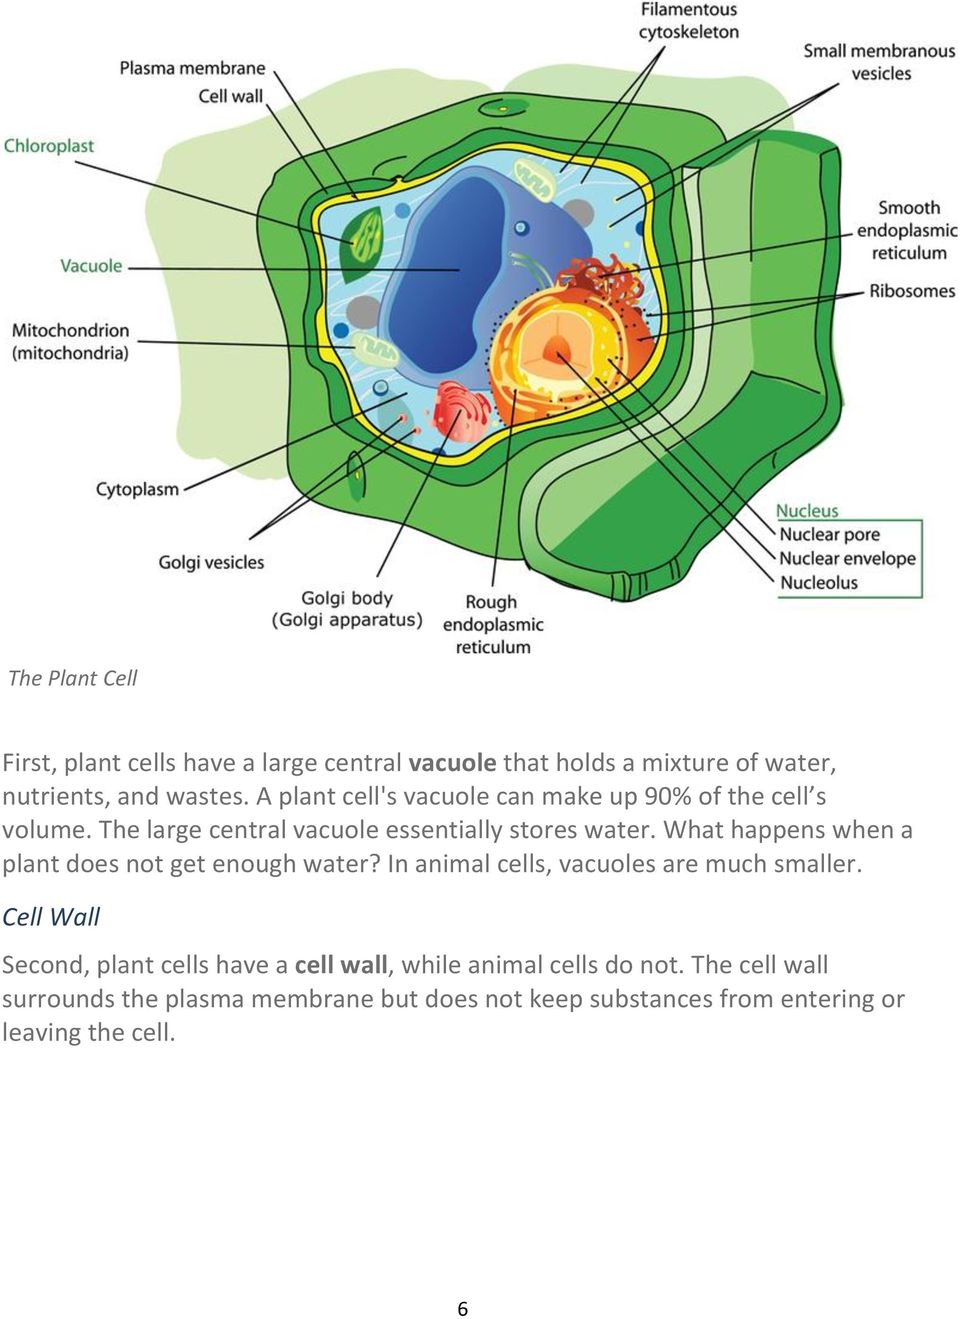 What happens when a plant does not get enough water? In animal cells, vacuoles are much smaller.